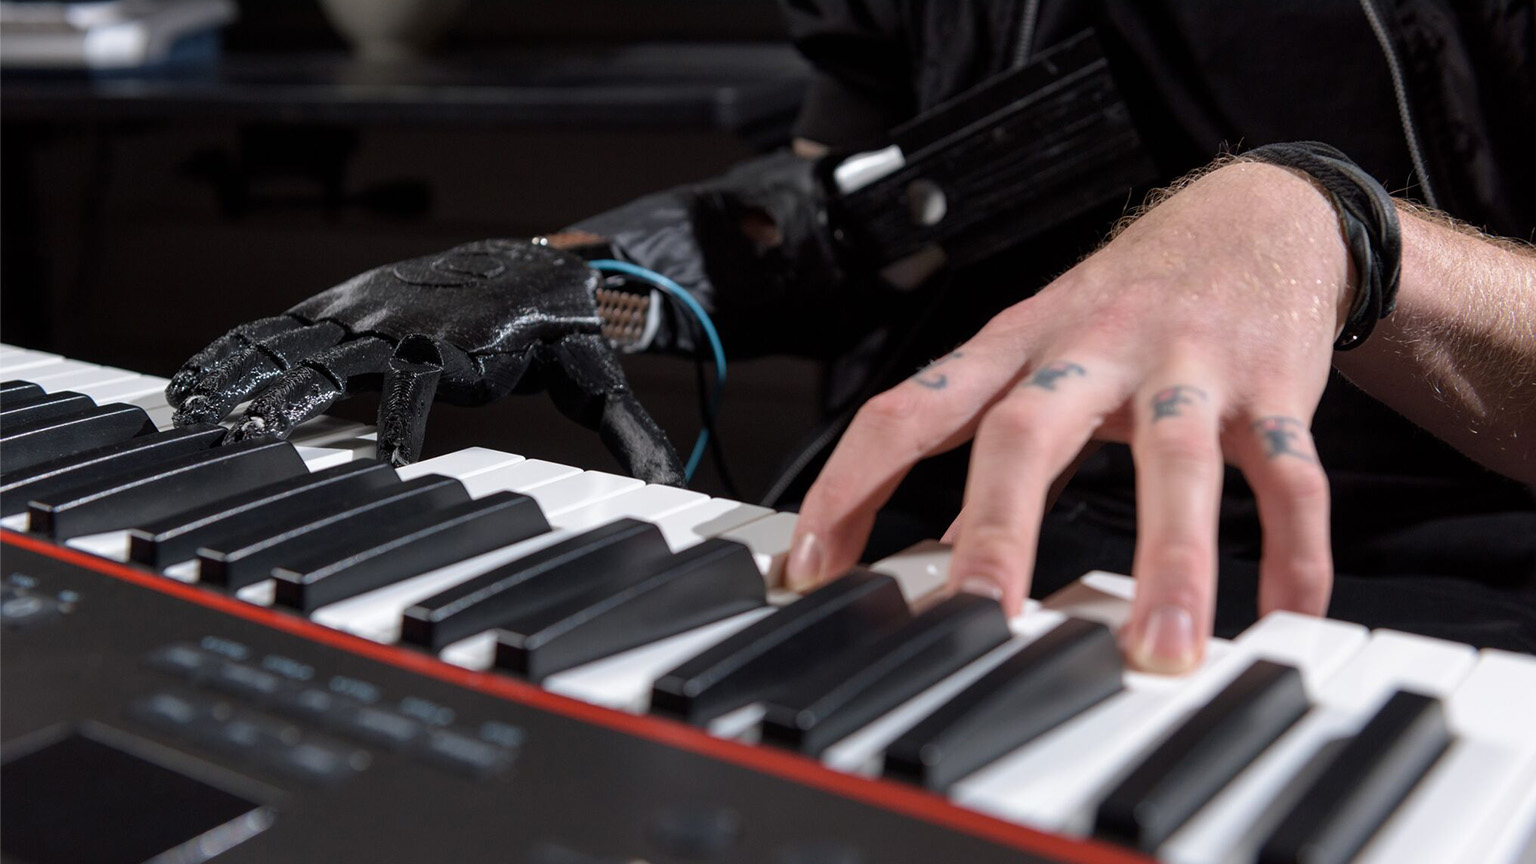 The skywalker hand, a prosthetic hand designed to help amputees play music, plays the piano.The skywalker hand, a prosthetic hand designed to help amputees play music, plays the piano.